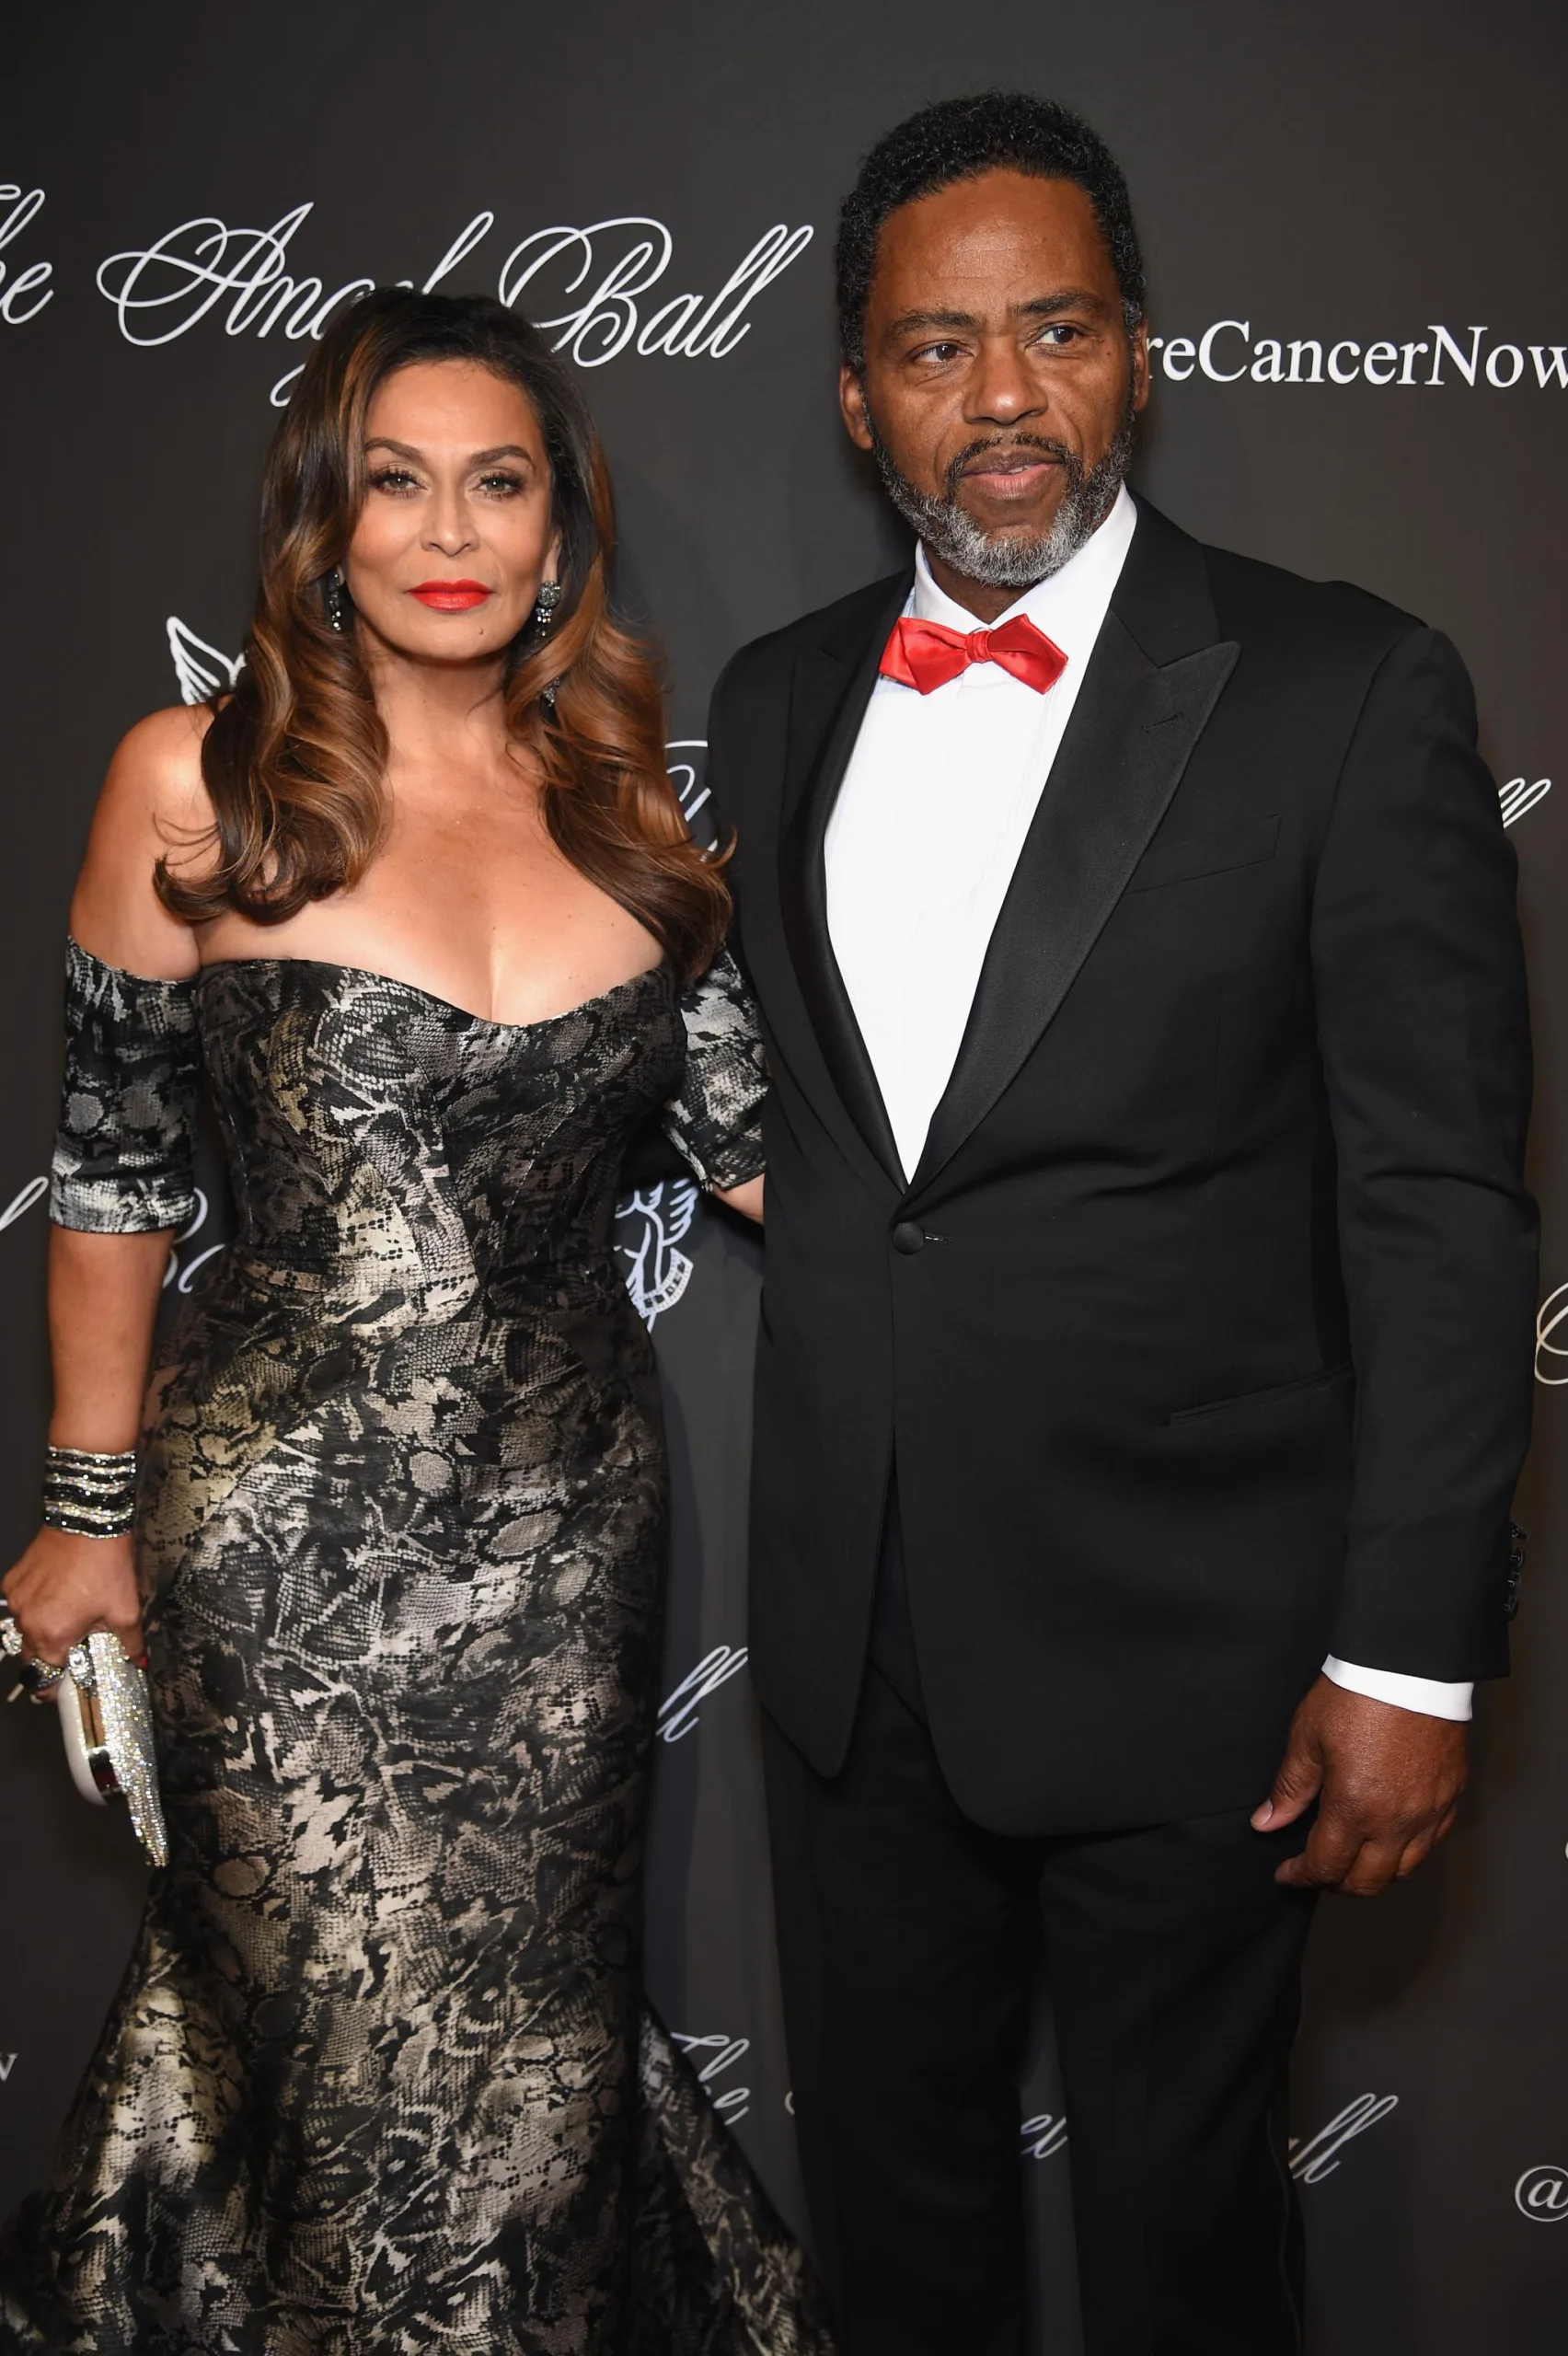 Beyoncé's mom, Tina Knowles, files for divorce from Richard Lawson